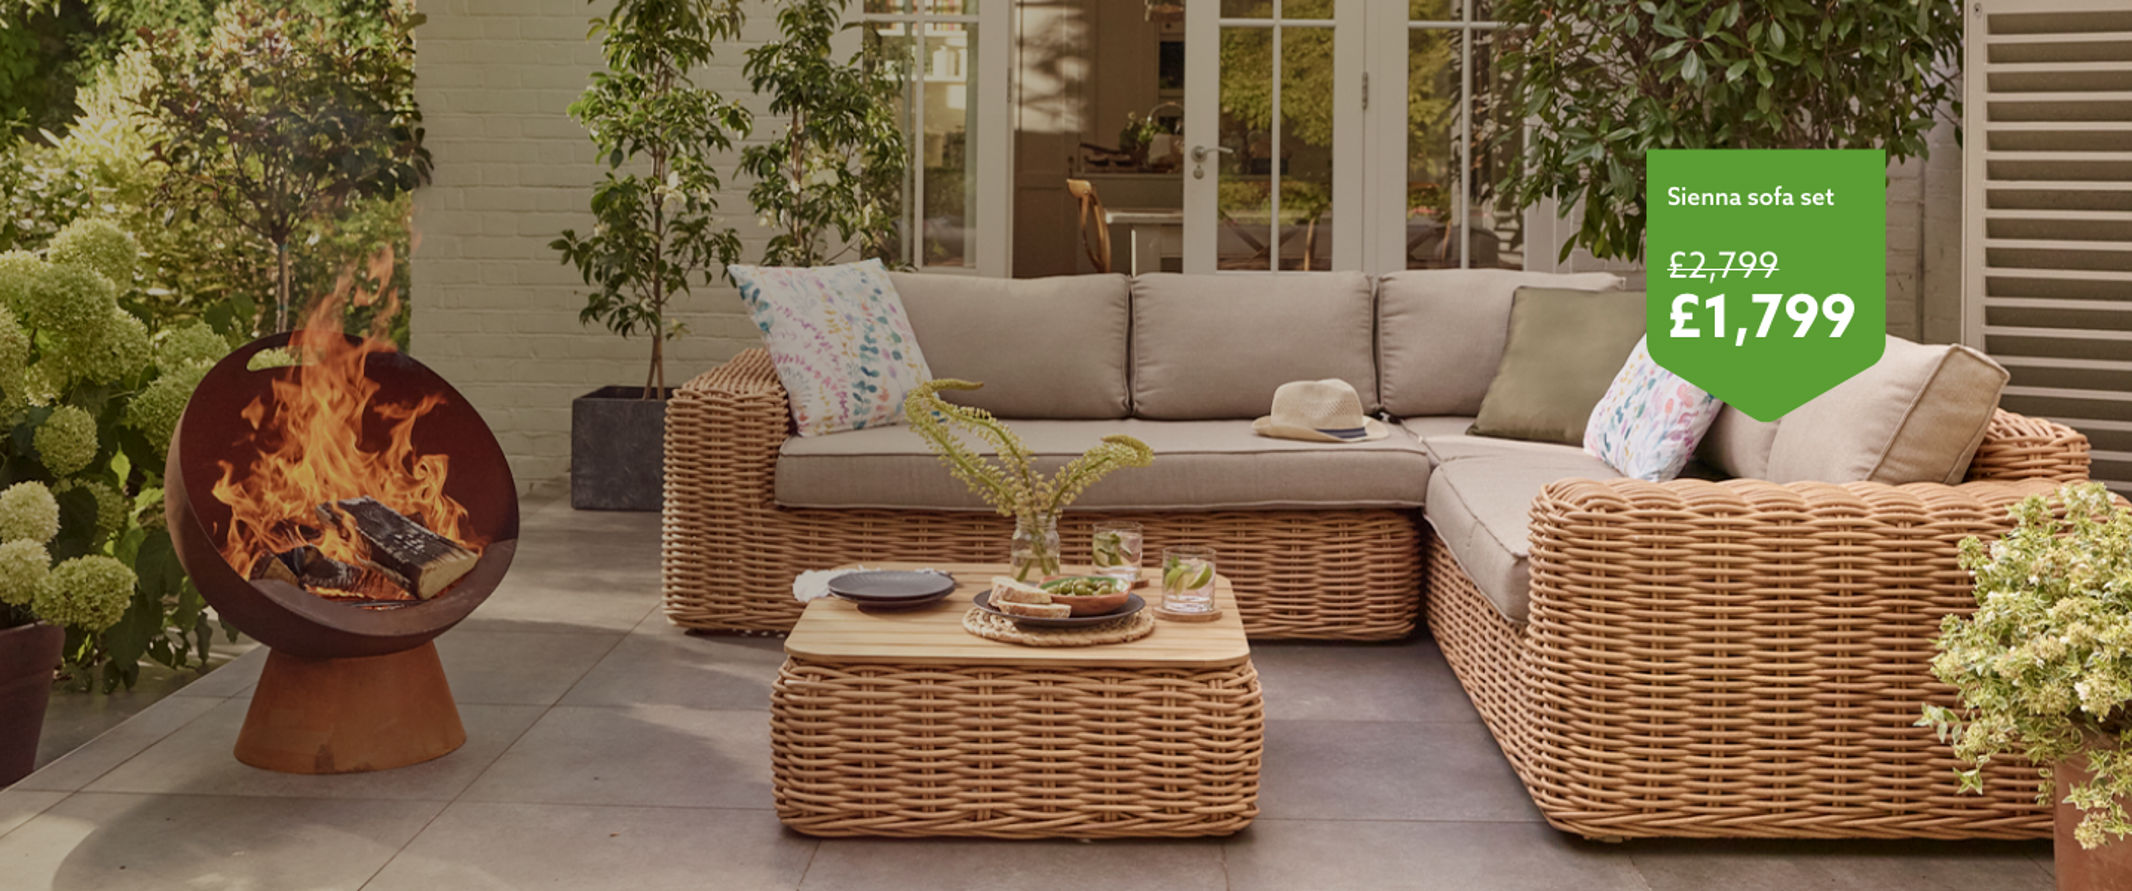 Outdoor living offers